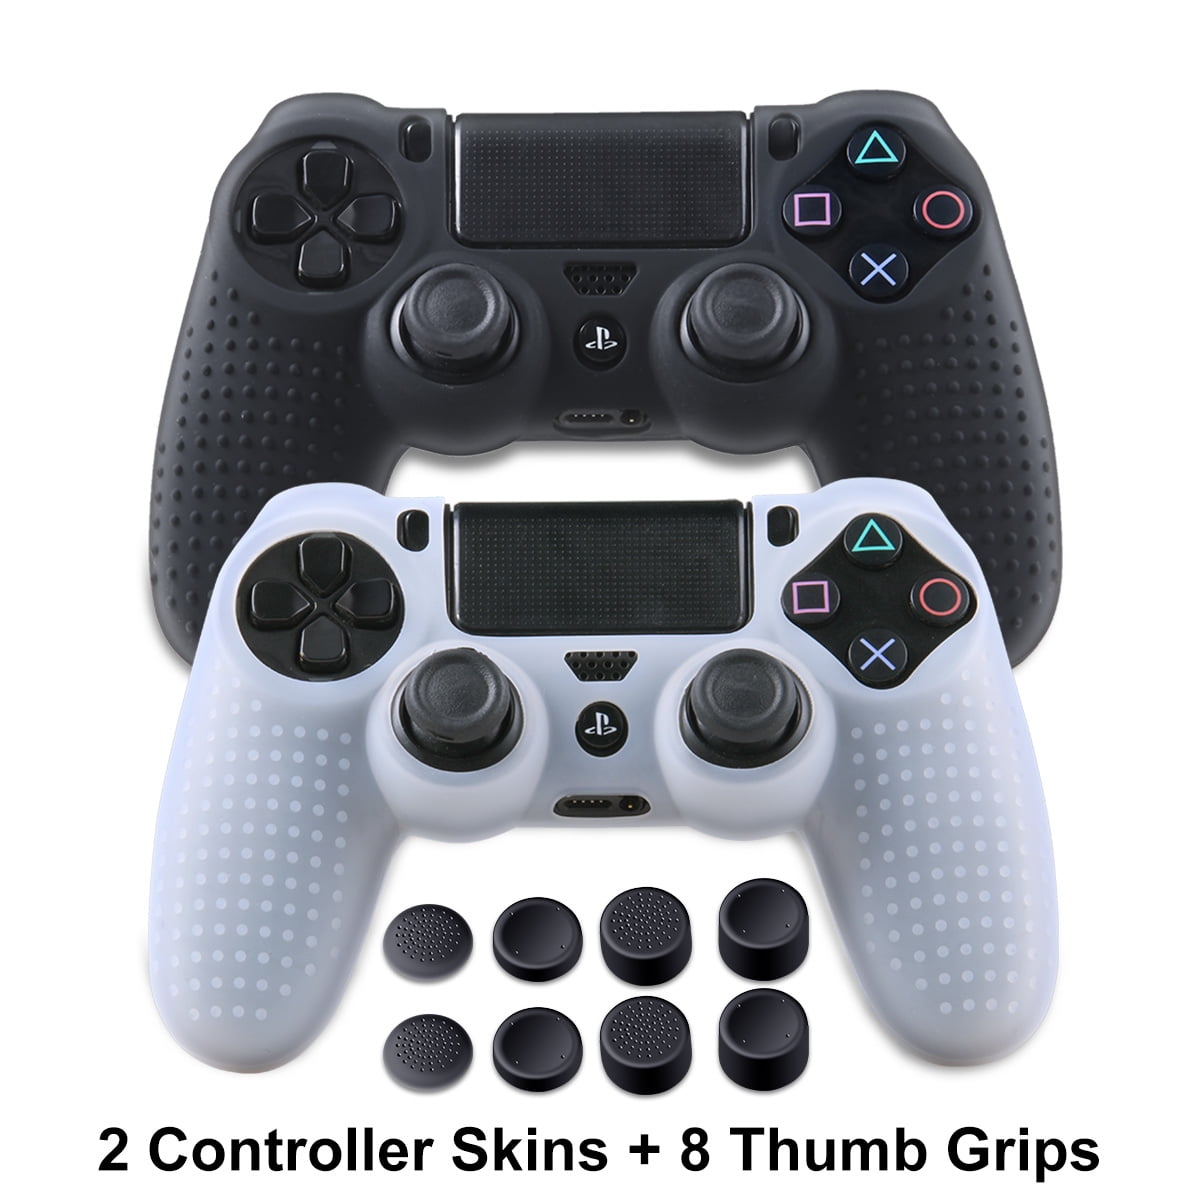 PS4/PS4 SLIM/PS4 PRO Controller Silicone Skins - DualShock 4 Covers  Anti-slip Thumb Grip Protector Skin Case Set for Sony PS4, PS4 Slim, PS4  Pro - 2 Pack PS4 Accessories - Black 